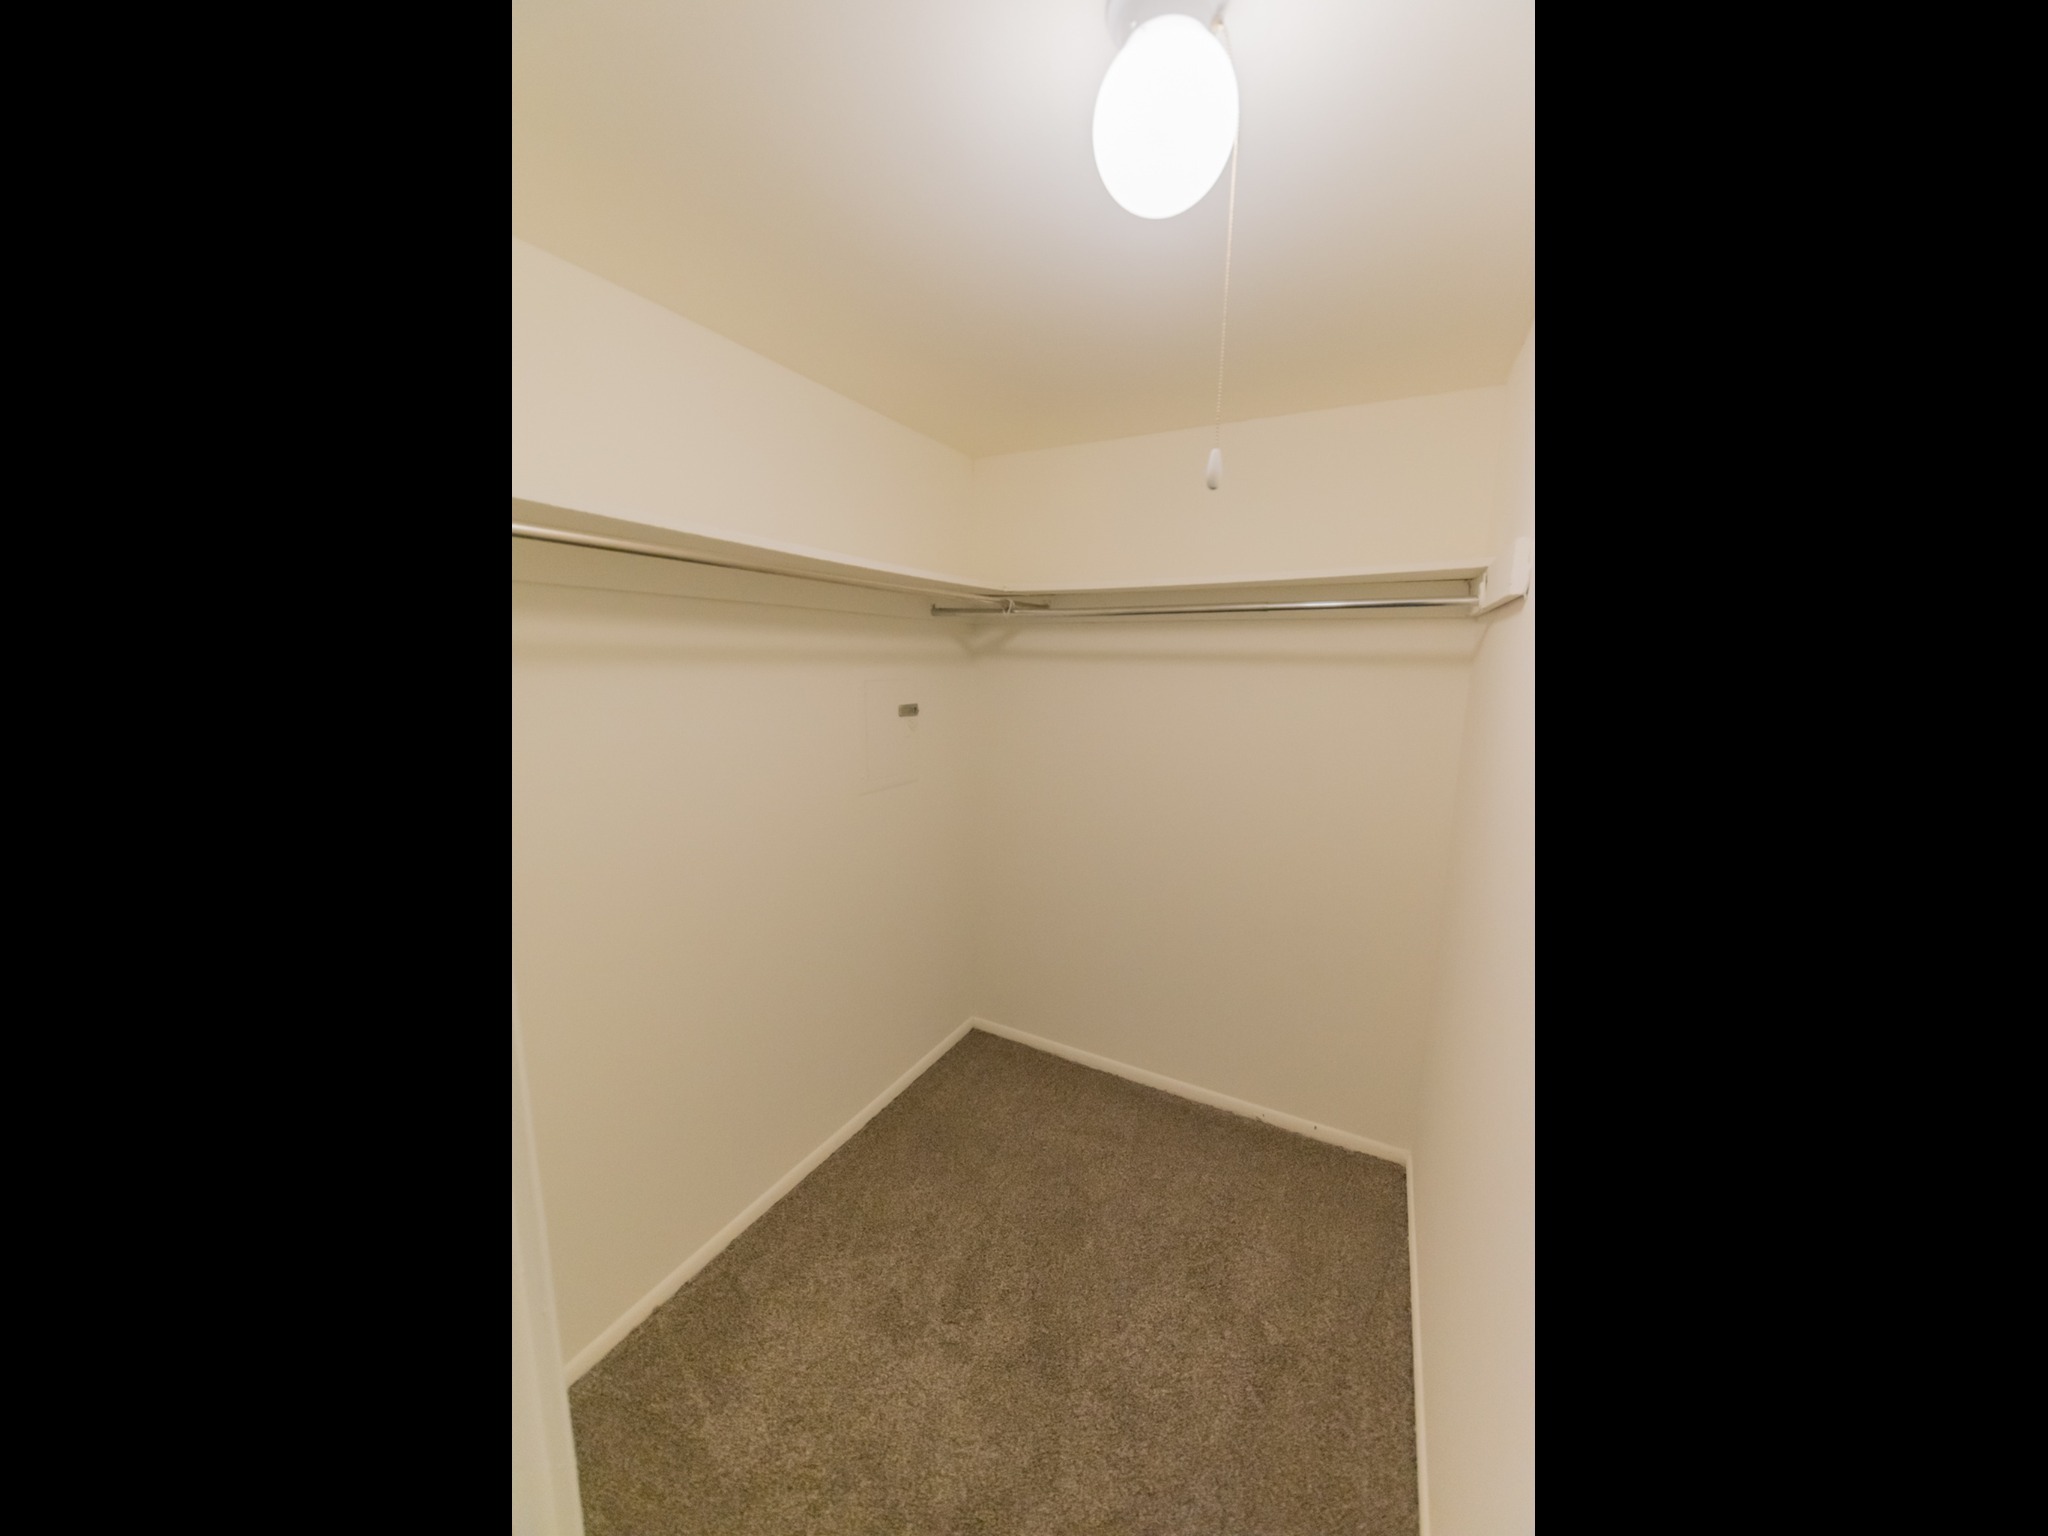 Walk-in closet with a ceiling light.